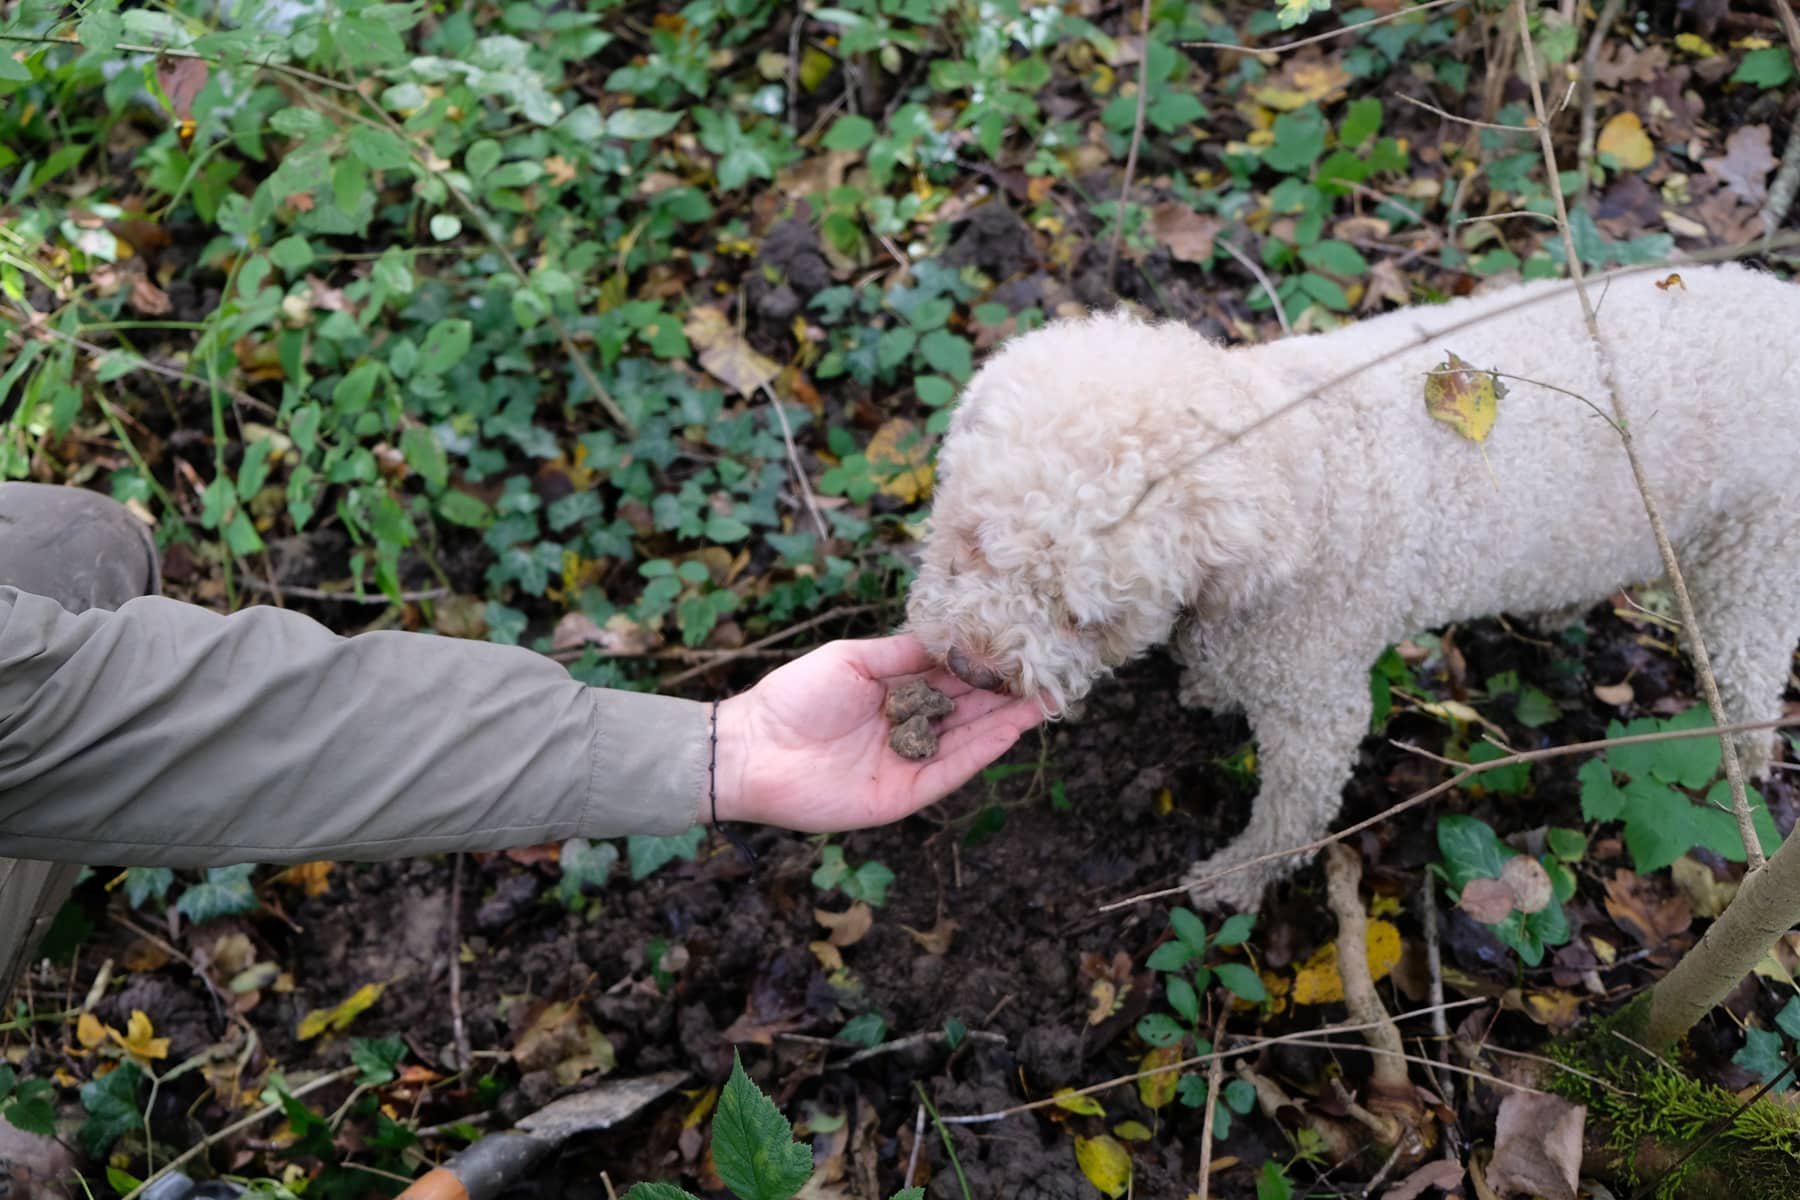 In the stunning Istria region, a person lovingly feeds a white poodle amidst the enchanting woods.